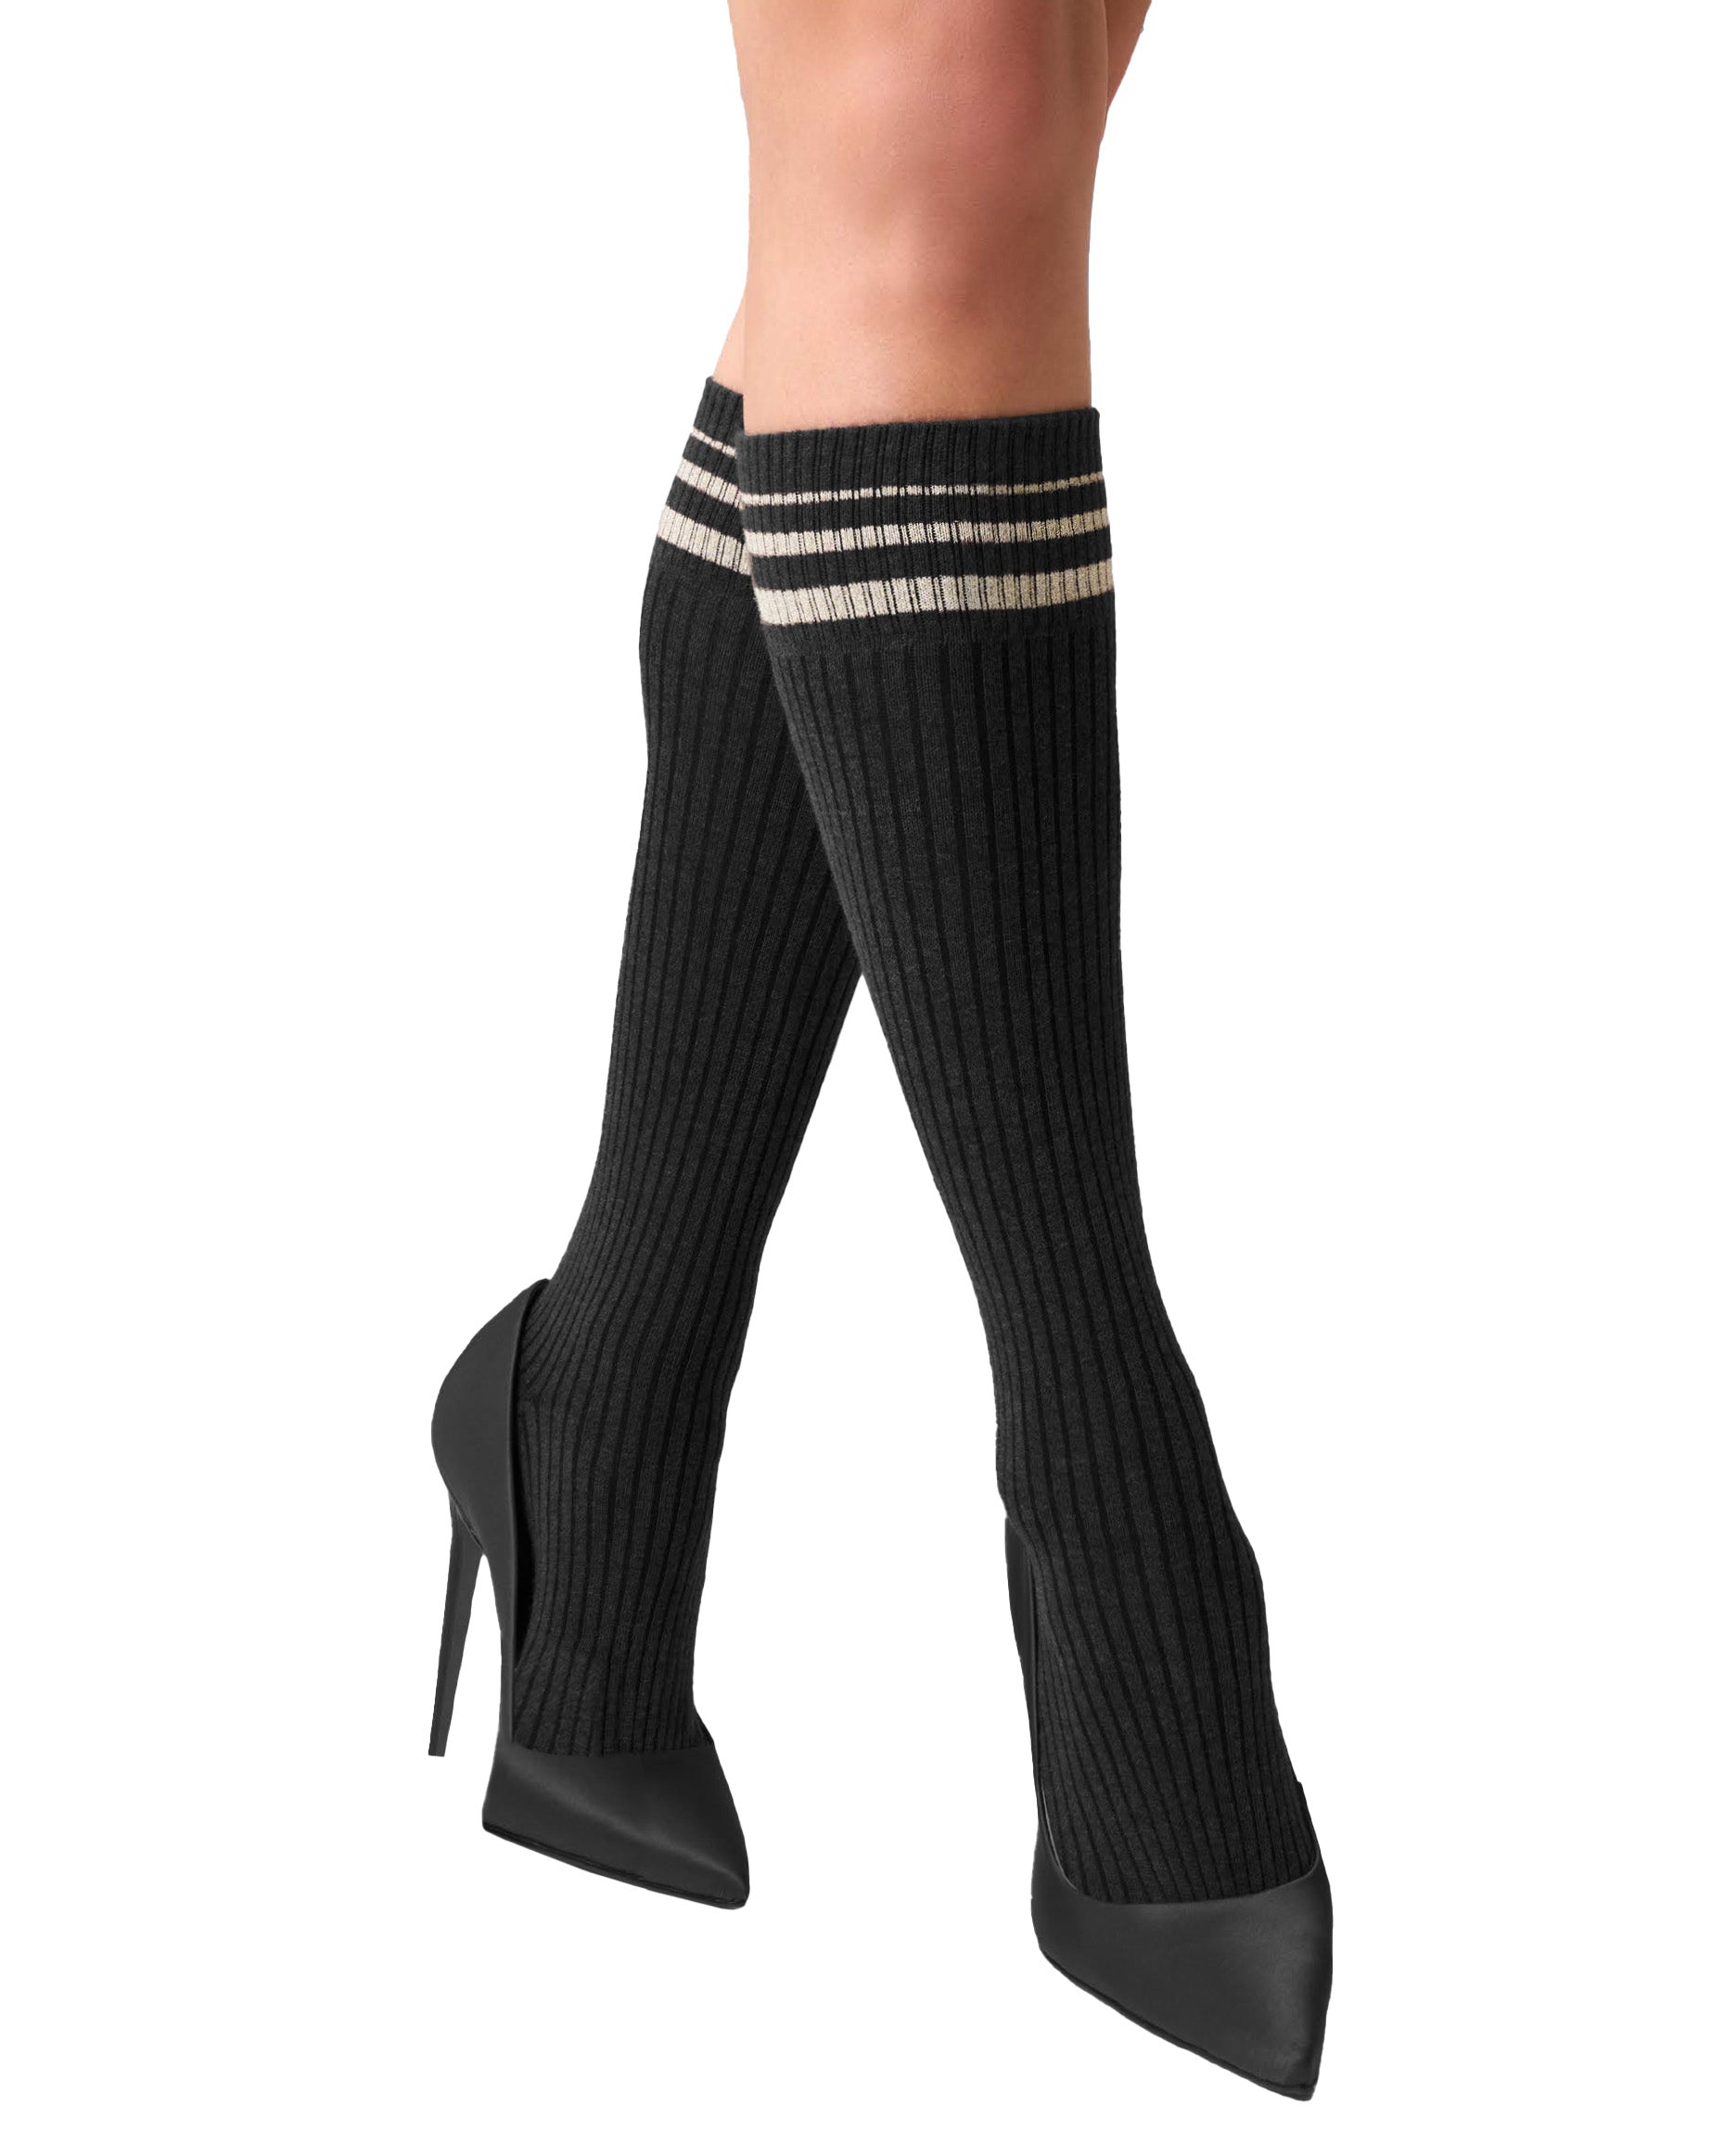 SiSi Pinstripe Gambaletto - Soft and warm black cotton ribbed knee-high socks with deep comfort cuff with contrasting gold lamé stripes